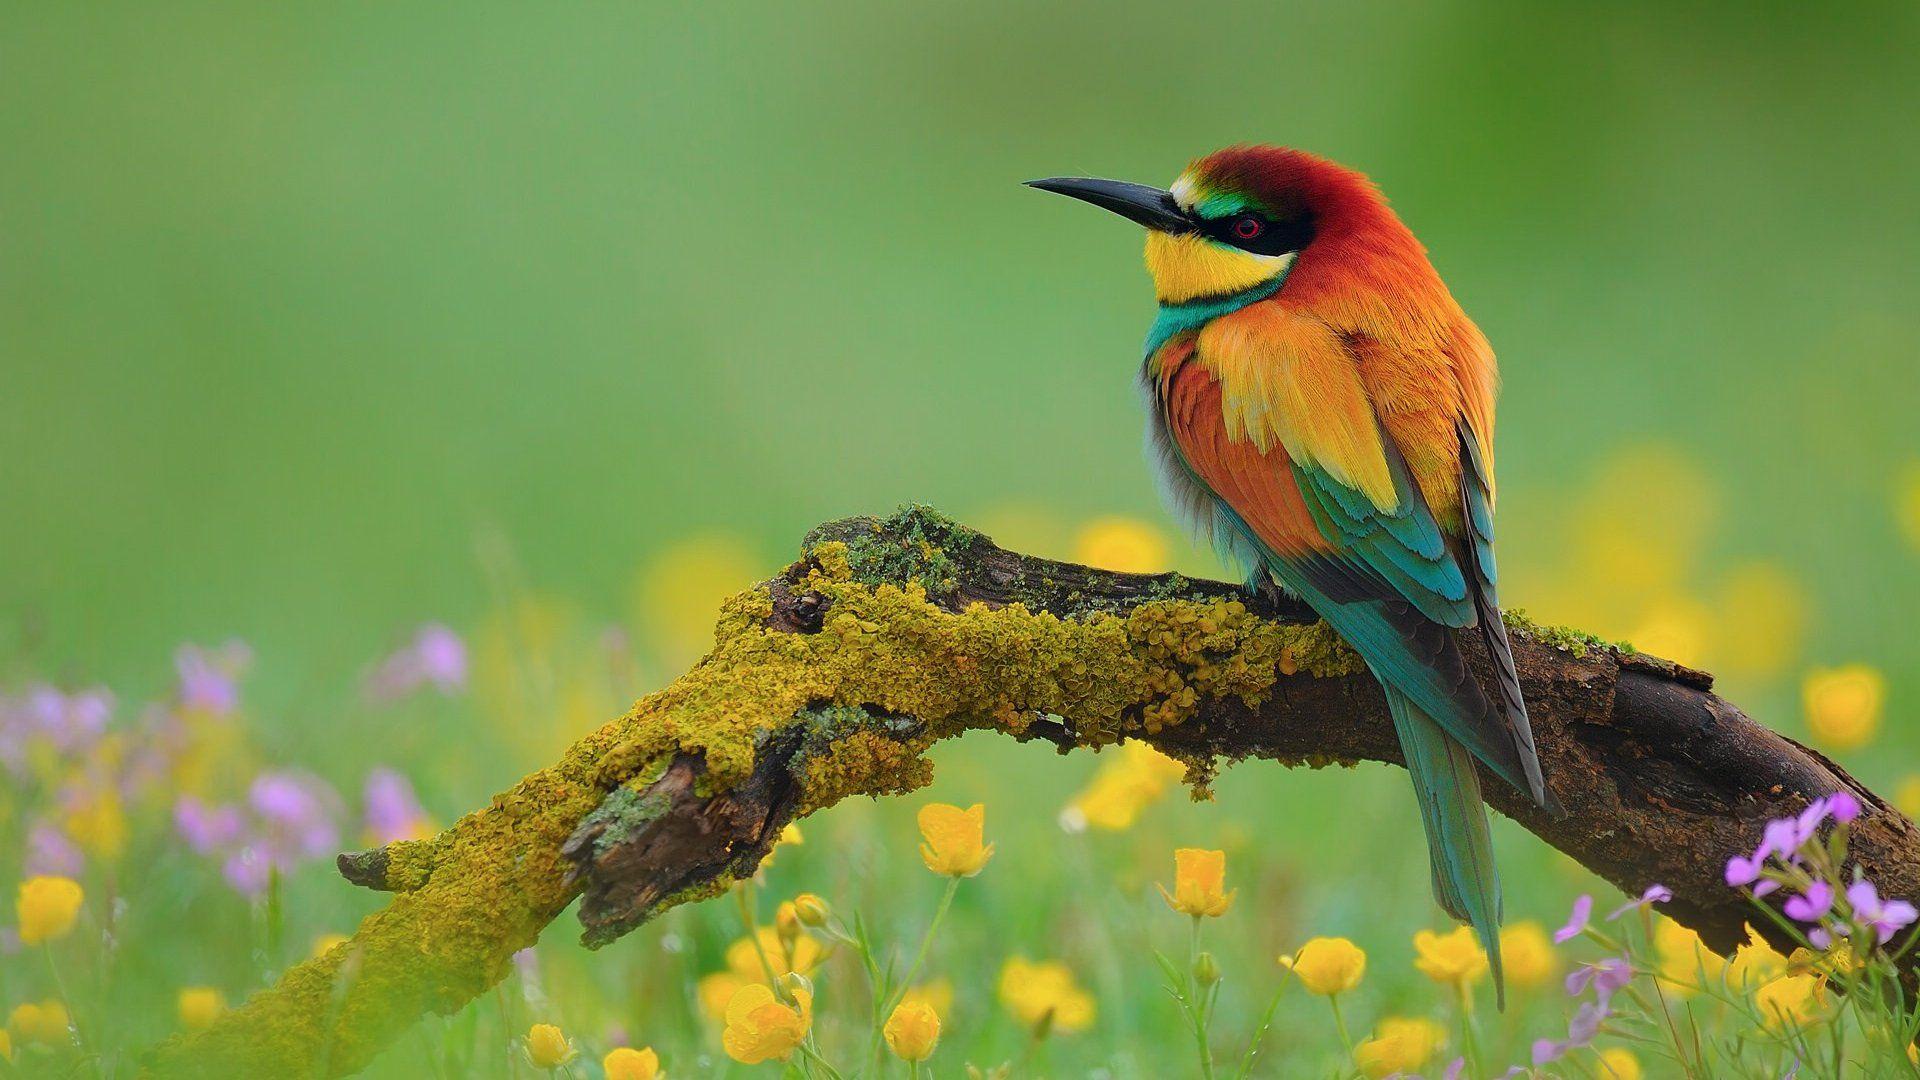 Beautiful Birds and Flowers Wallpapers Download 1920x1080